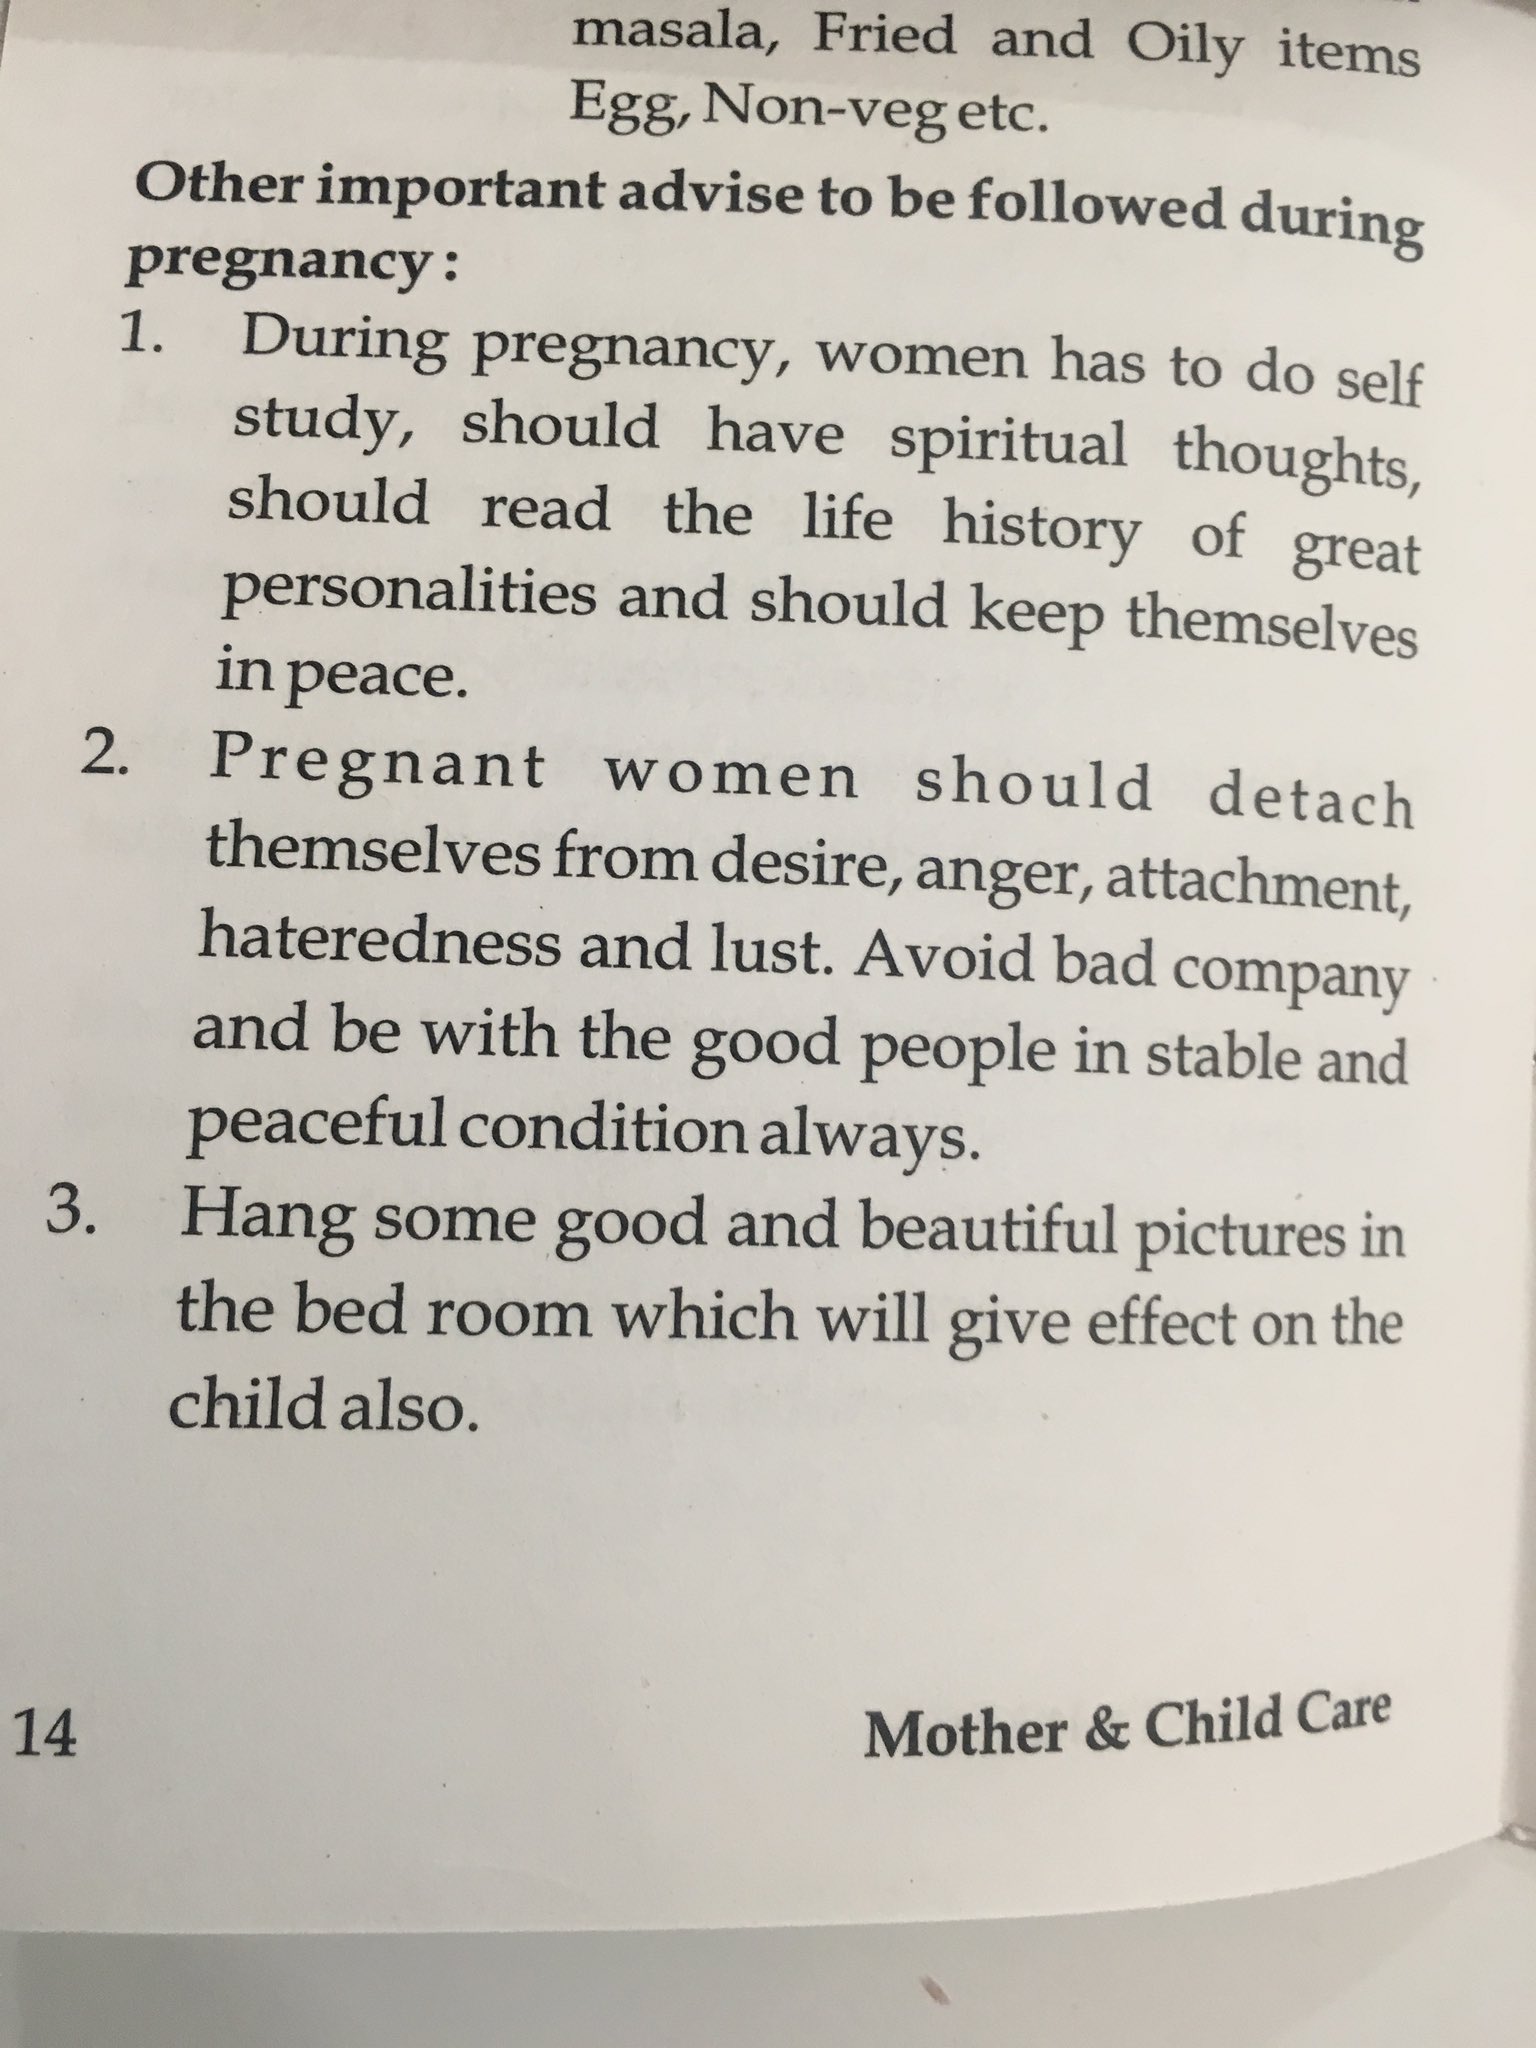 mother and child care booklet for women during pregnancy. 